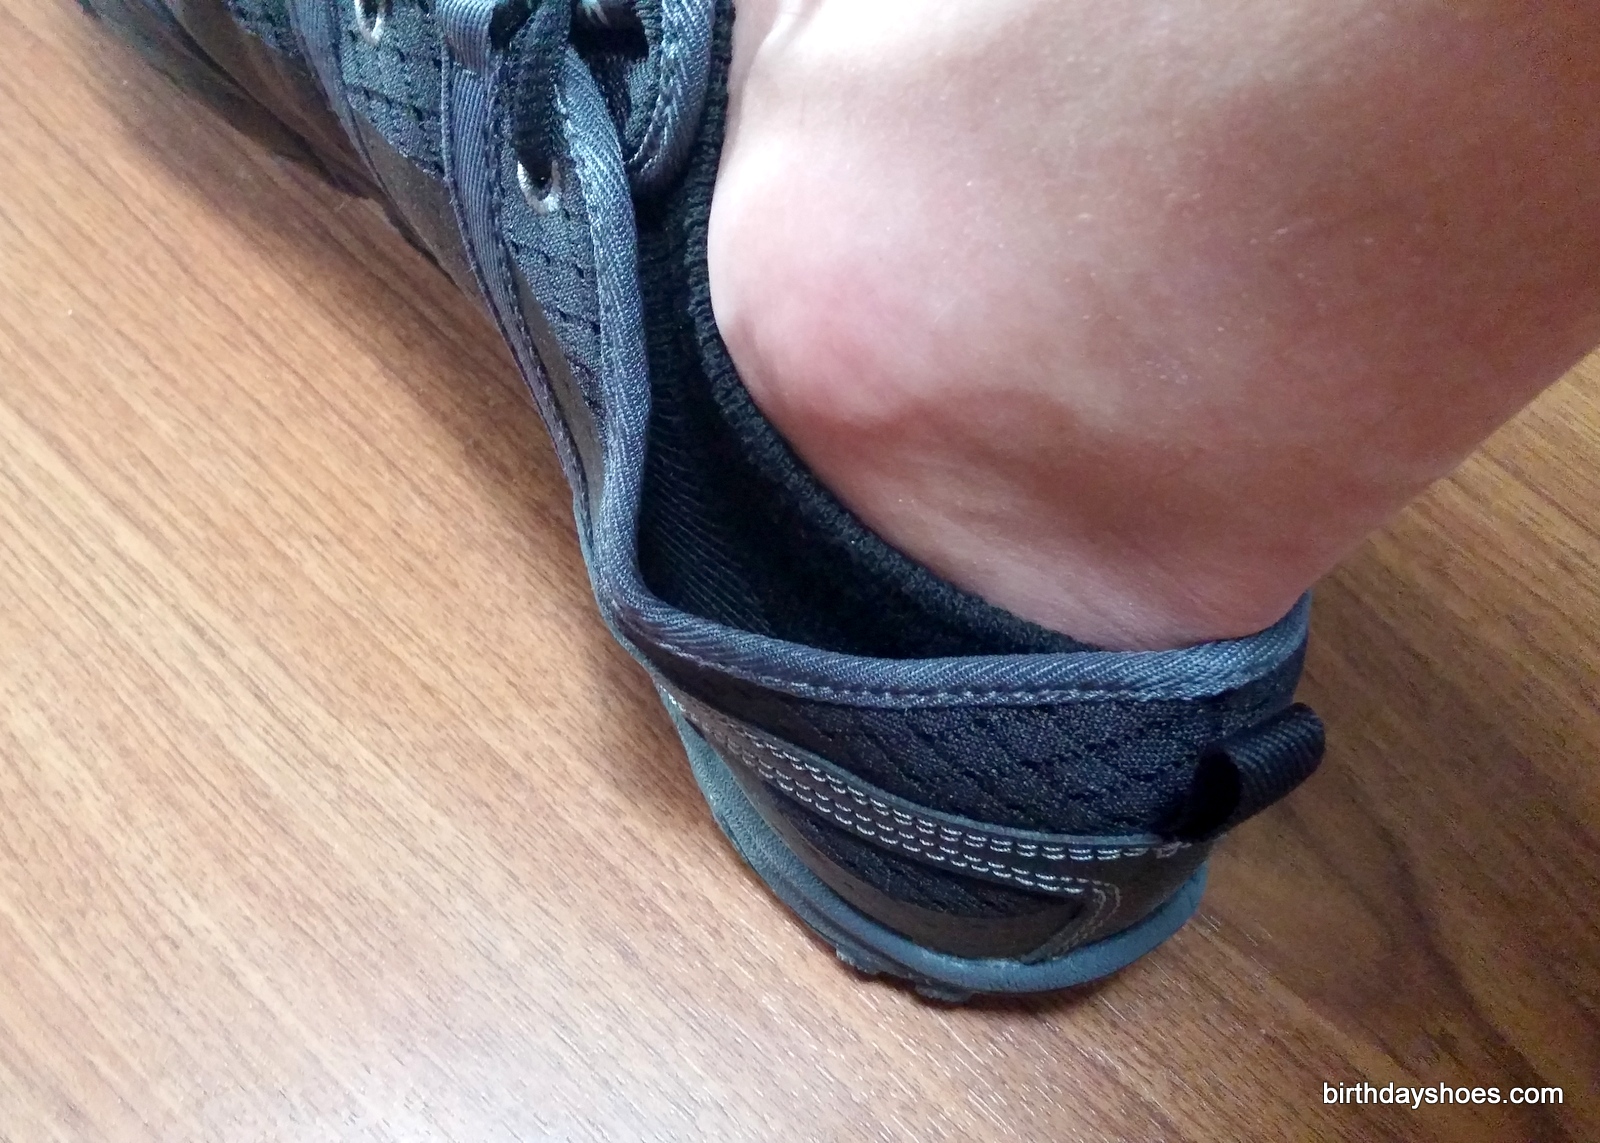 This gap creates an opportunity for debris to get inside the New Balance MT10v3